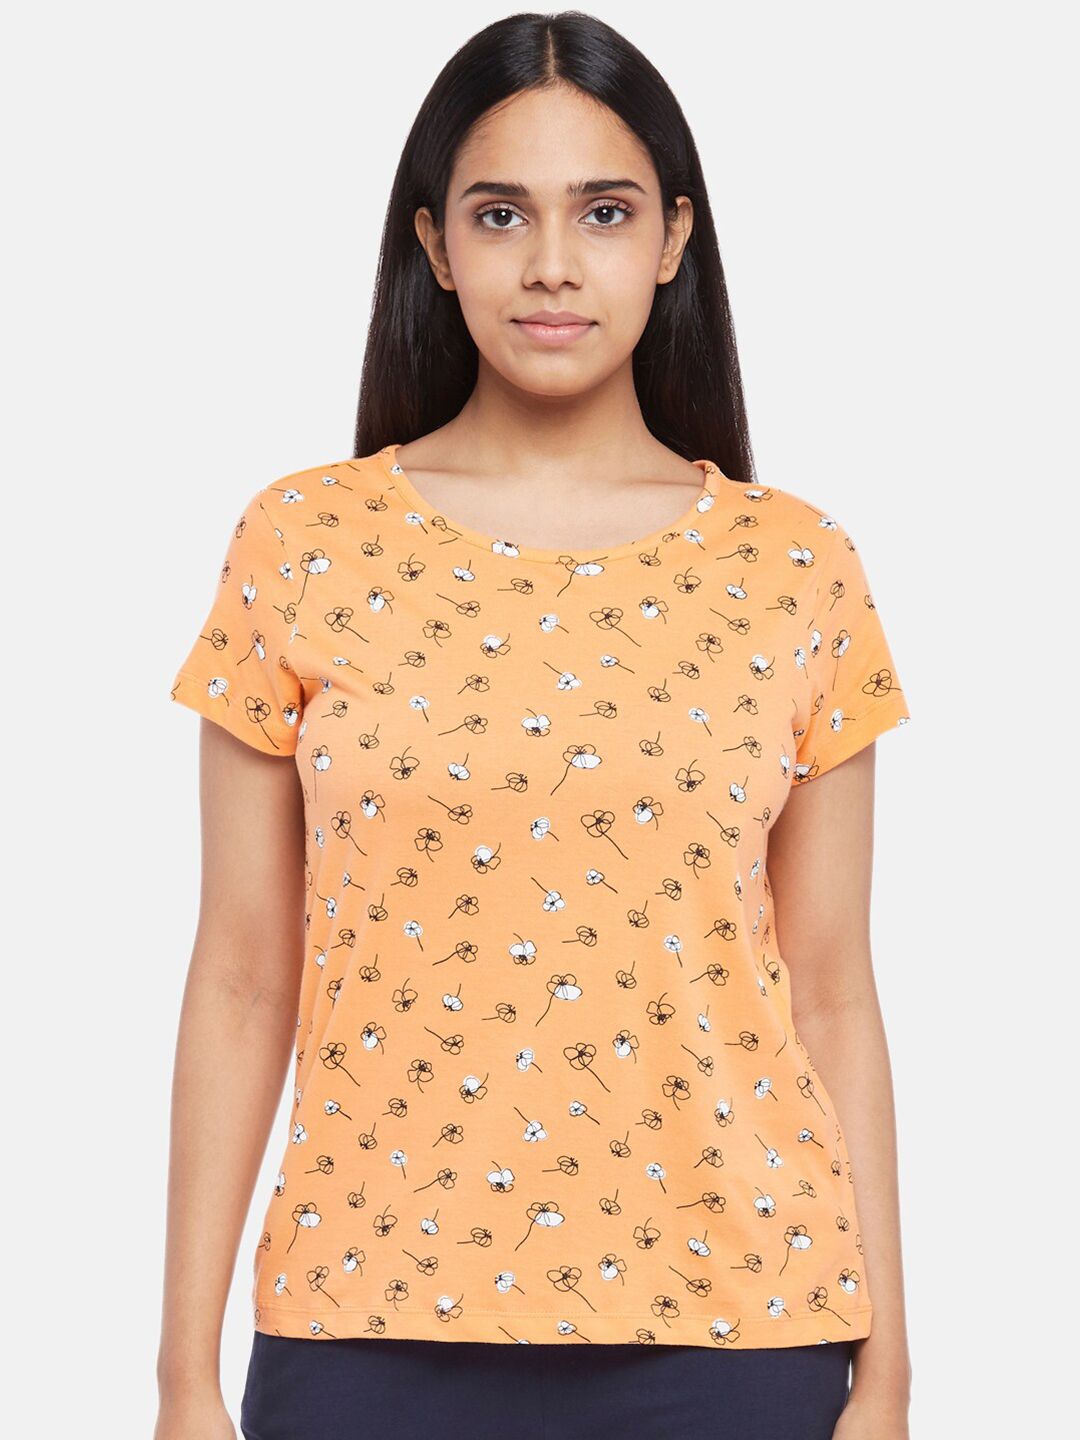 Dreamz by Pantaloons Orange Floral Printed Lounge T-shirts Price in India